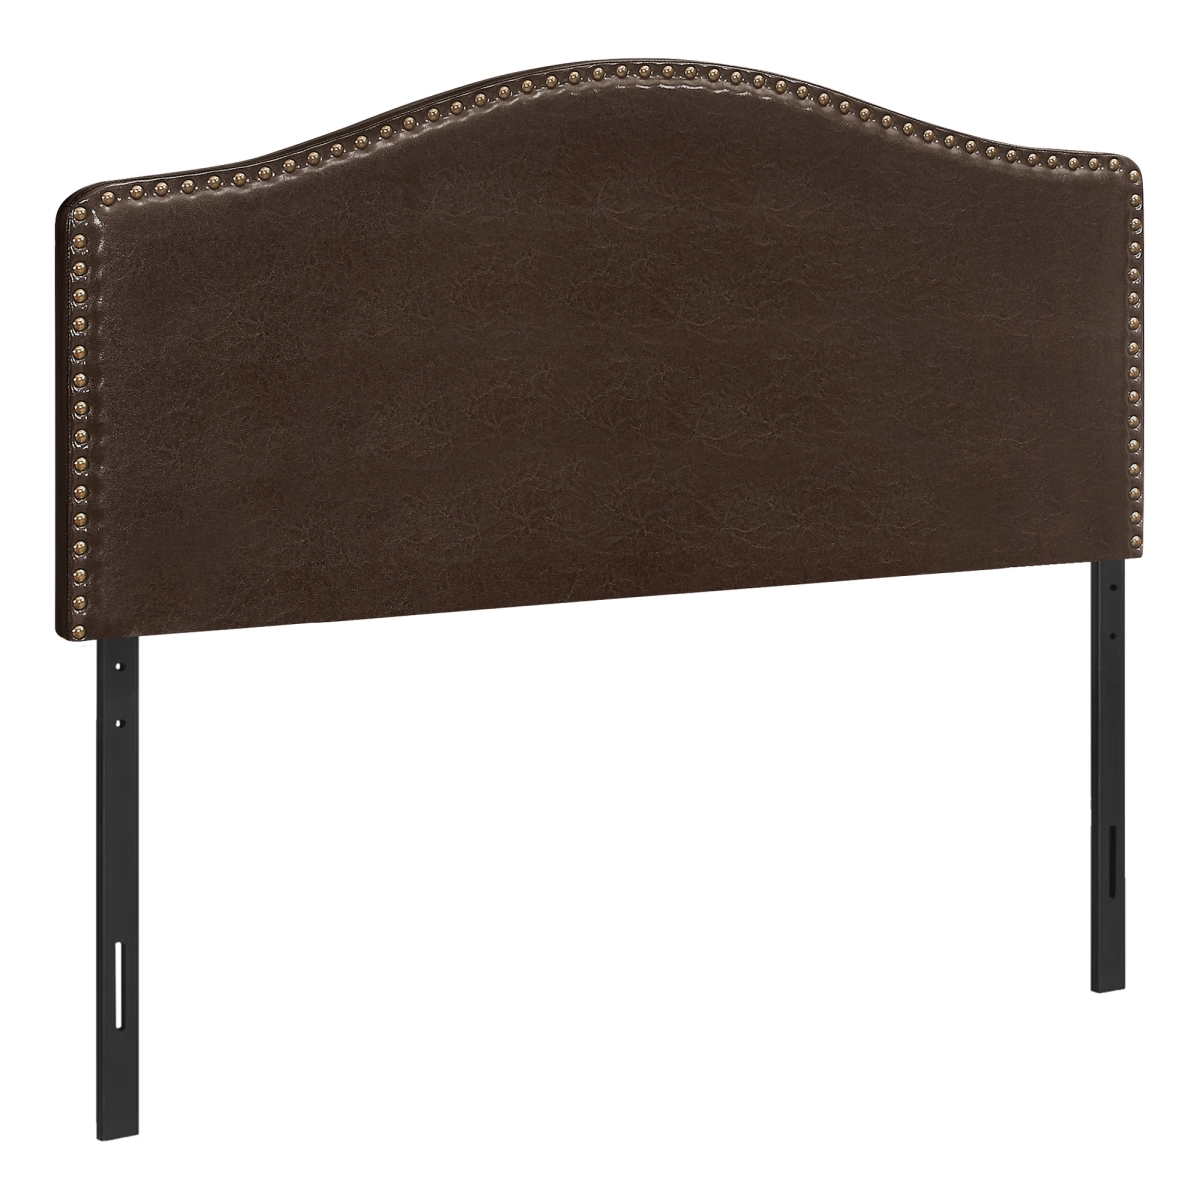 Picture of Monarch Specialties I 6010F 3 in. Leather Hook Headboard Bed - Brown & Black - Full Size